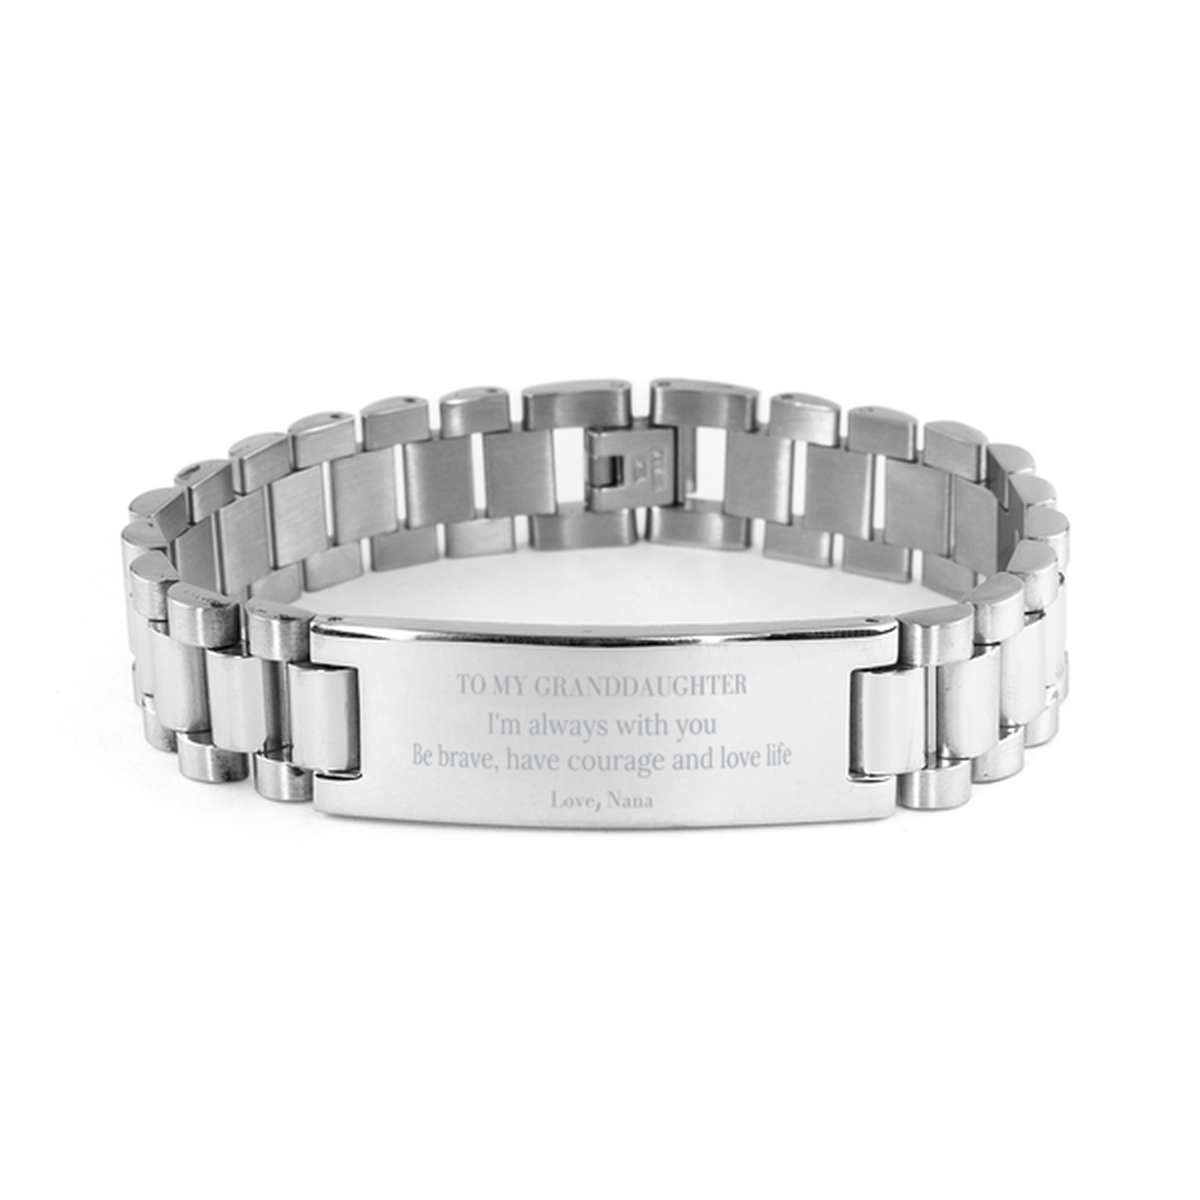 To My Granddaughter Gifts from Nana, Unique Ladder Stainless Steel Bracelet Inspirational Christmas Birthday Graduation Gifts for Granddaughter I'm always with you. Be brave, have courage and love life. Love, Nana